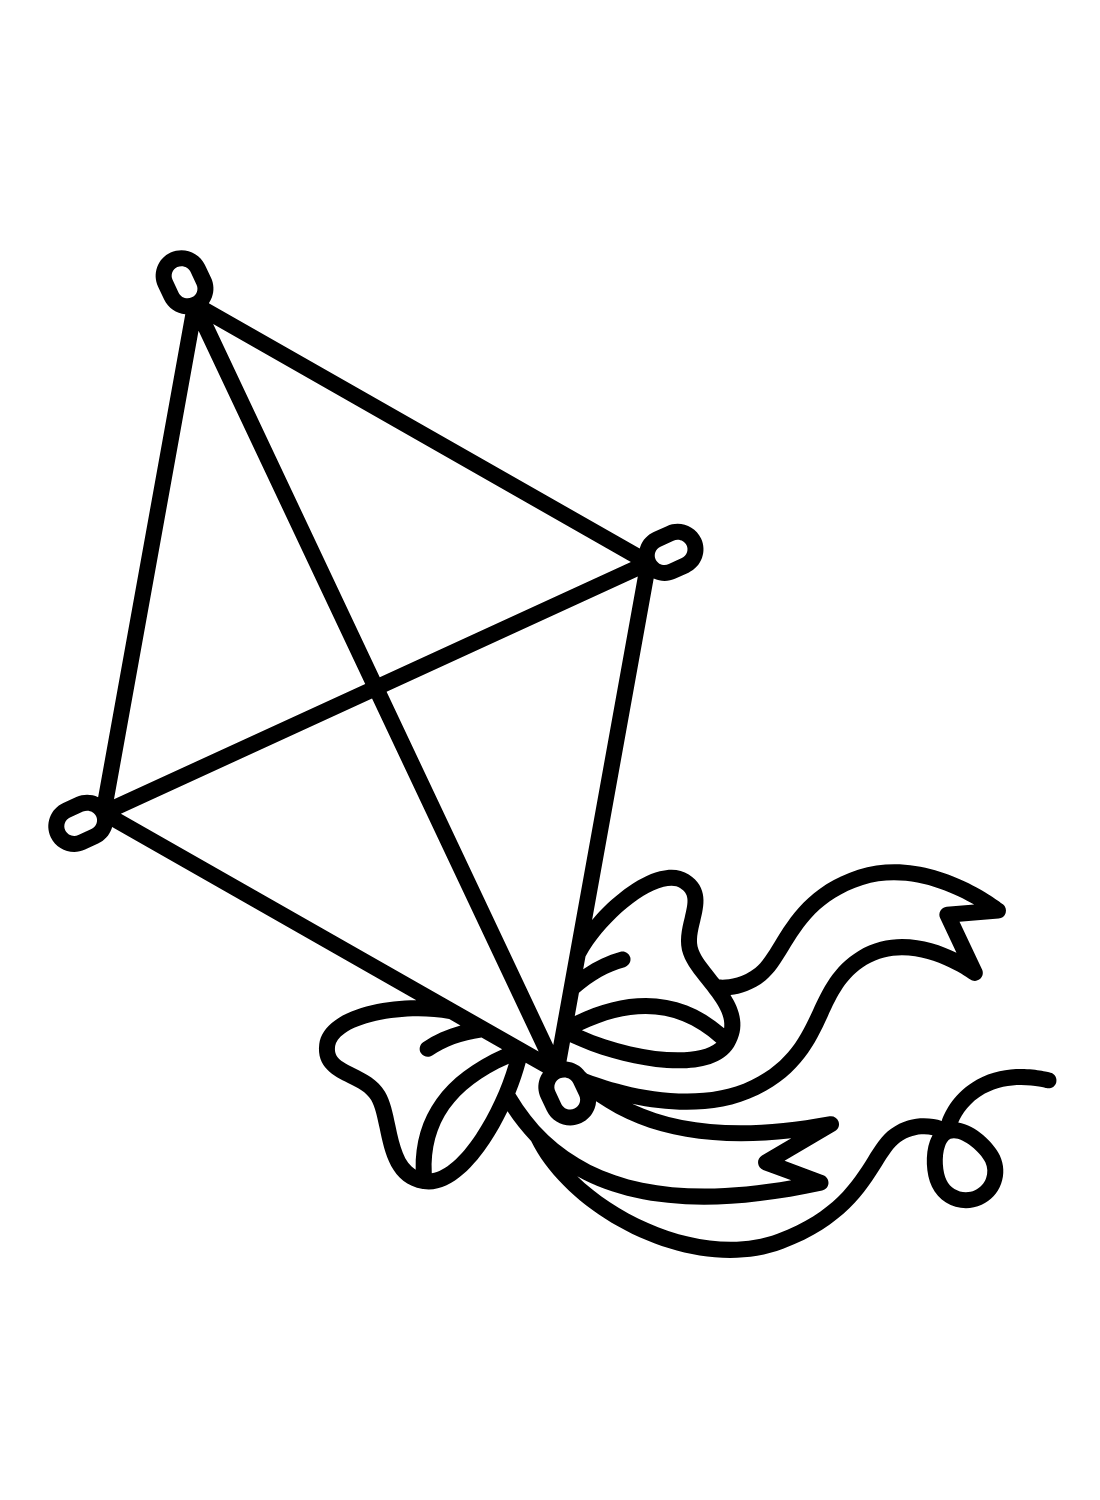 Kite with Bow